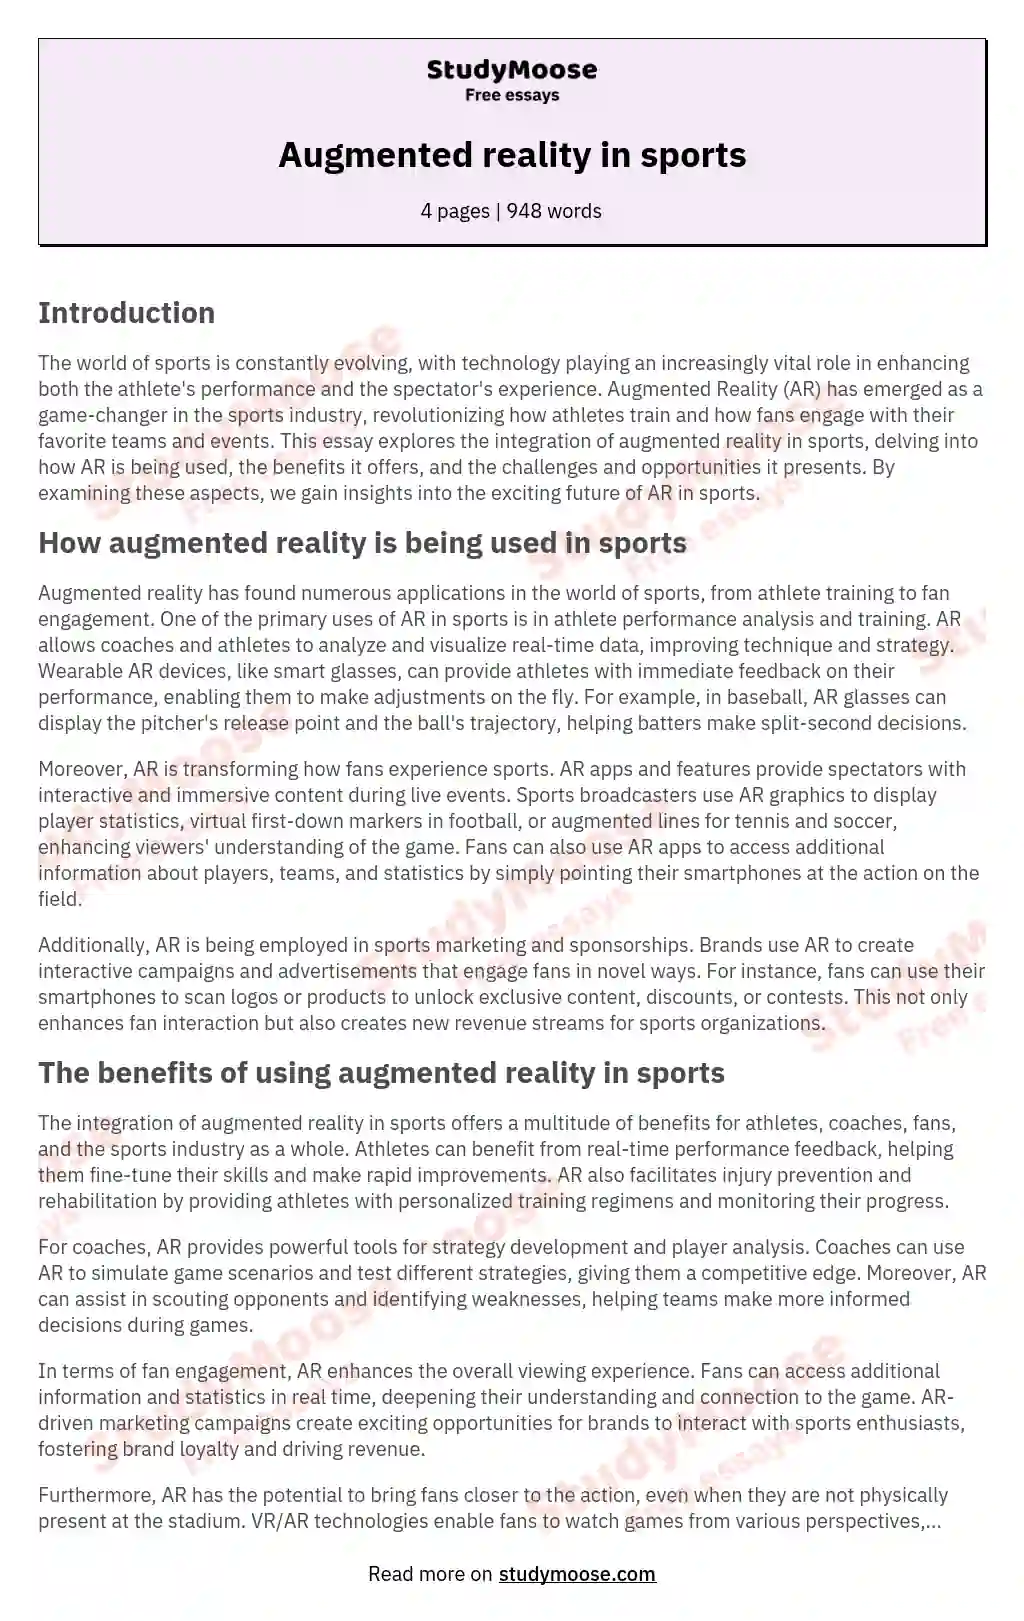 Augmented reality in sports essay